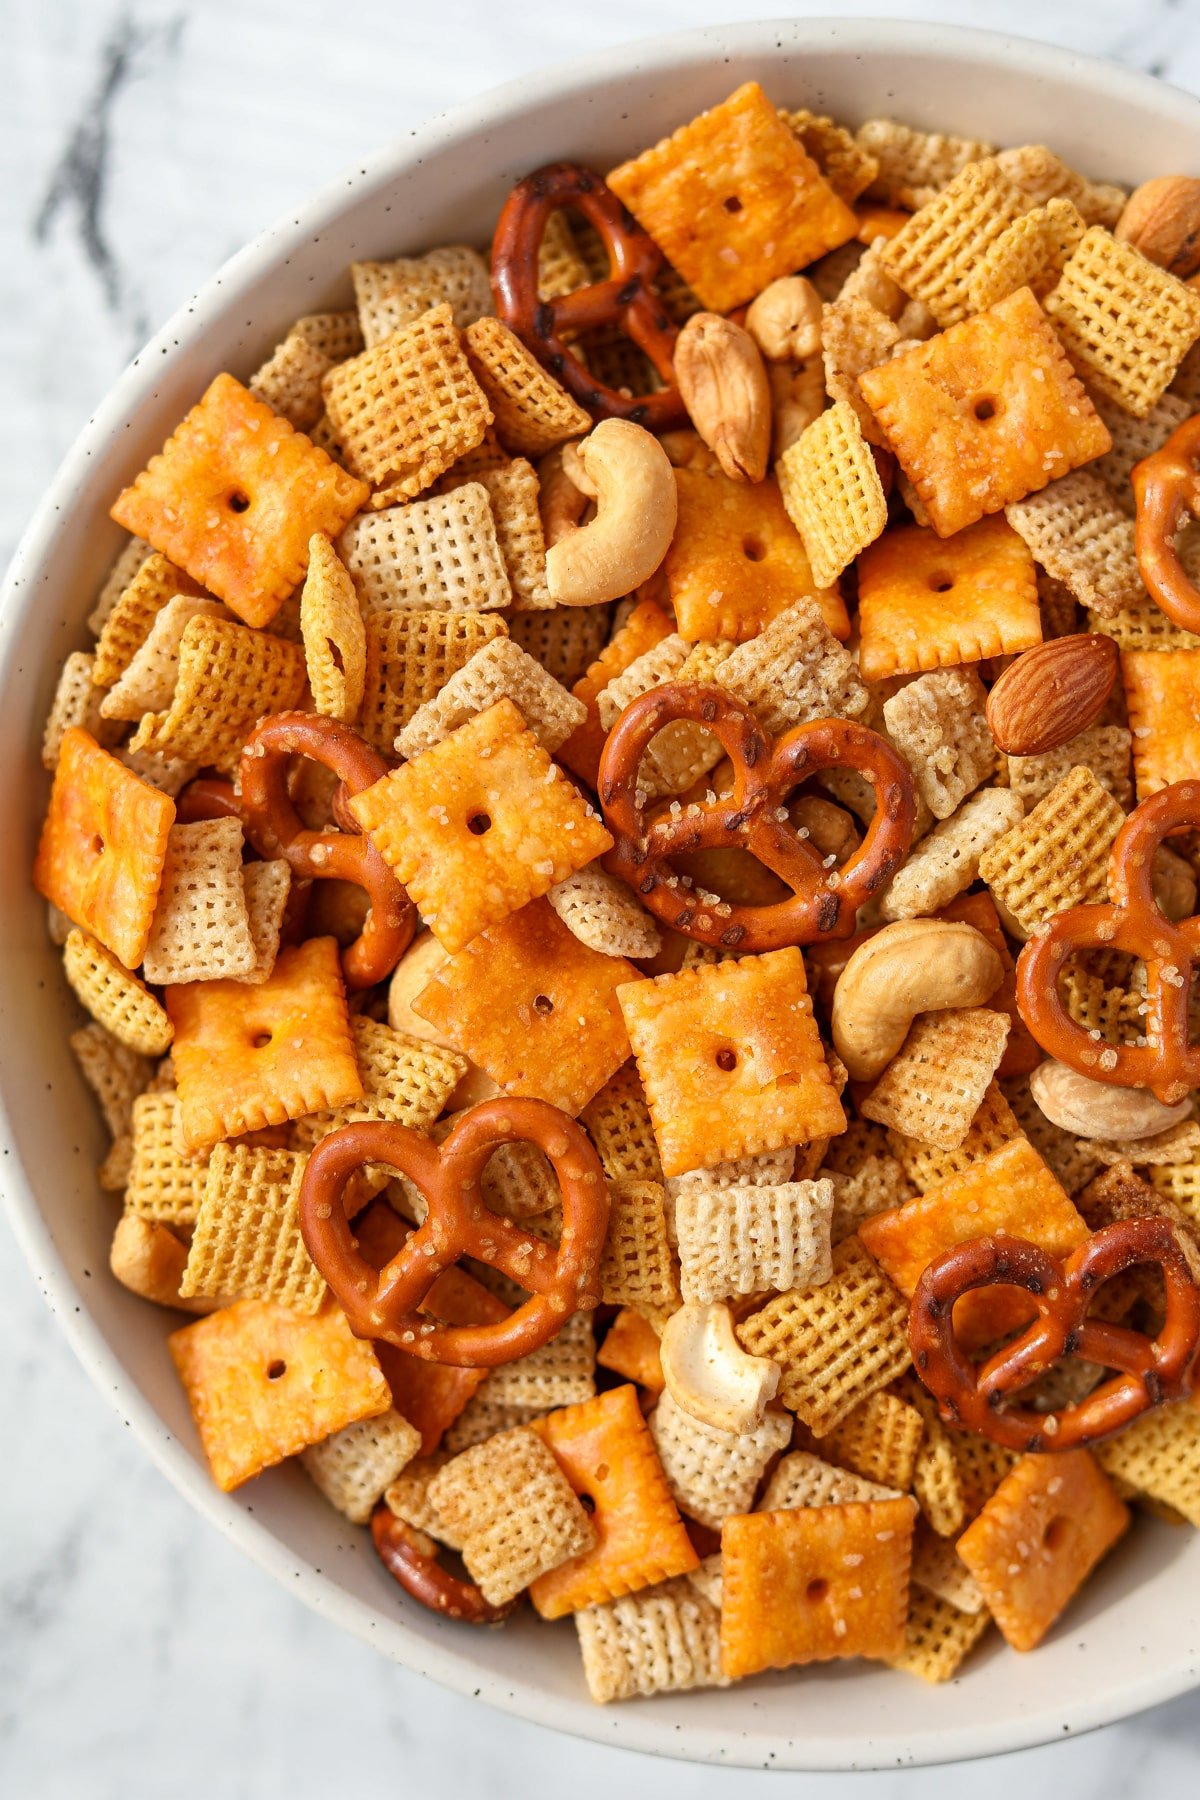 An overhead view of a bowl of snack mix with pretzels, crackers, cereal, and nuts.